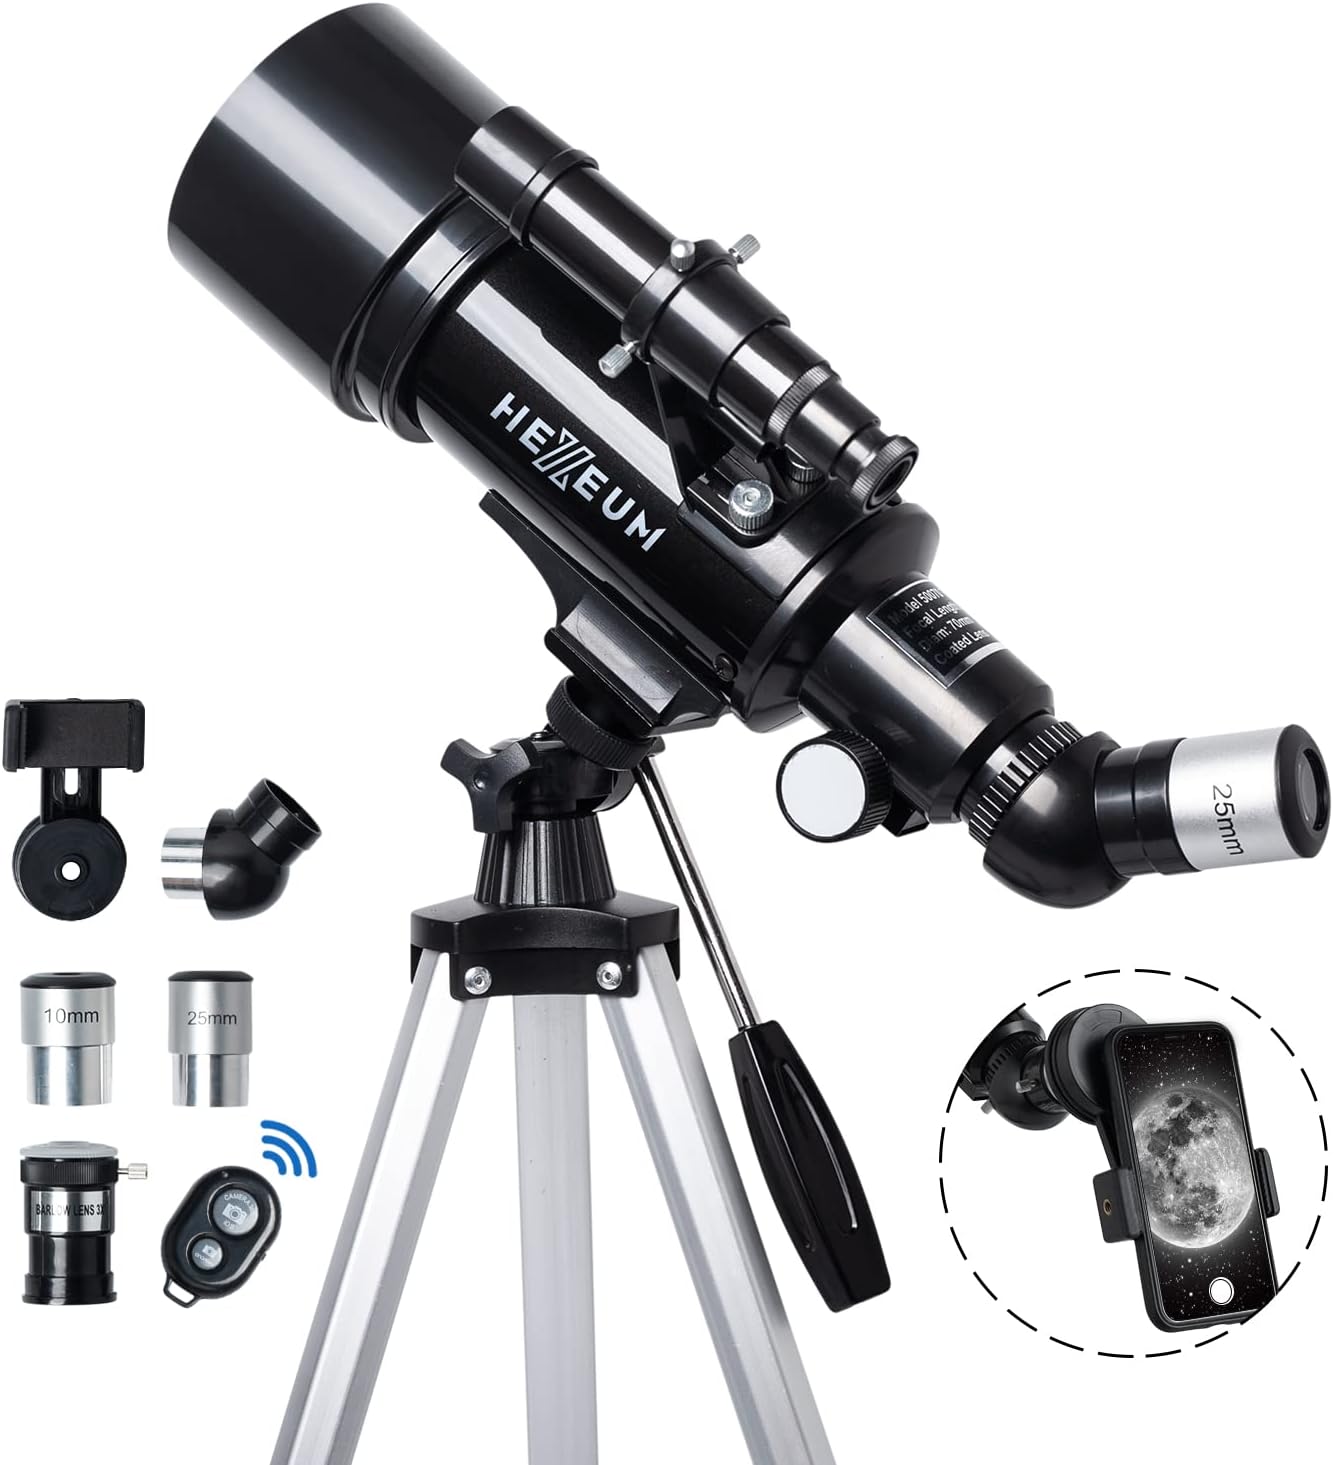 Hexeum 70mm Telescope for Kids & Adults Review